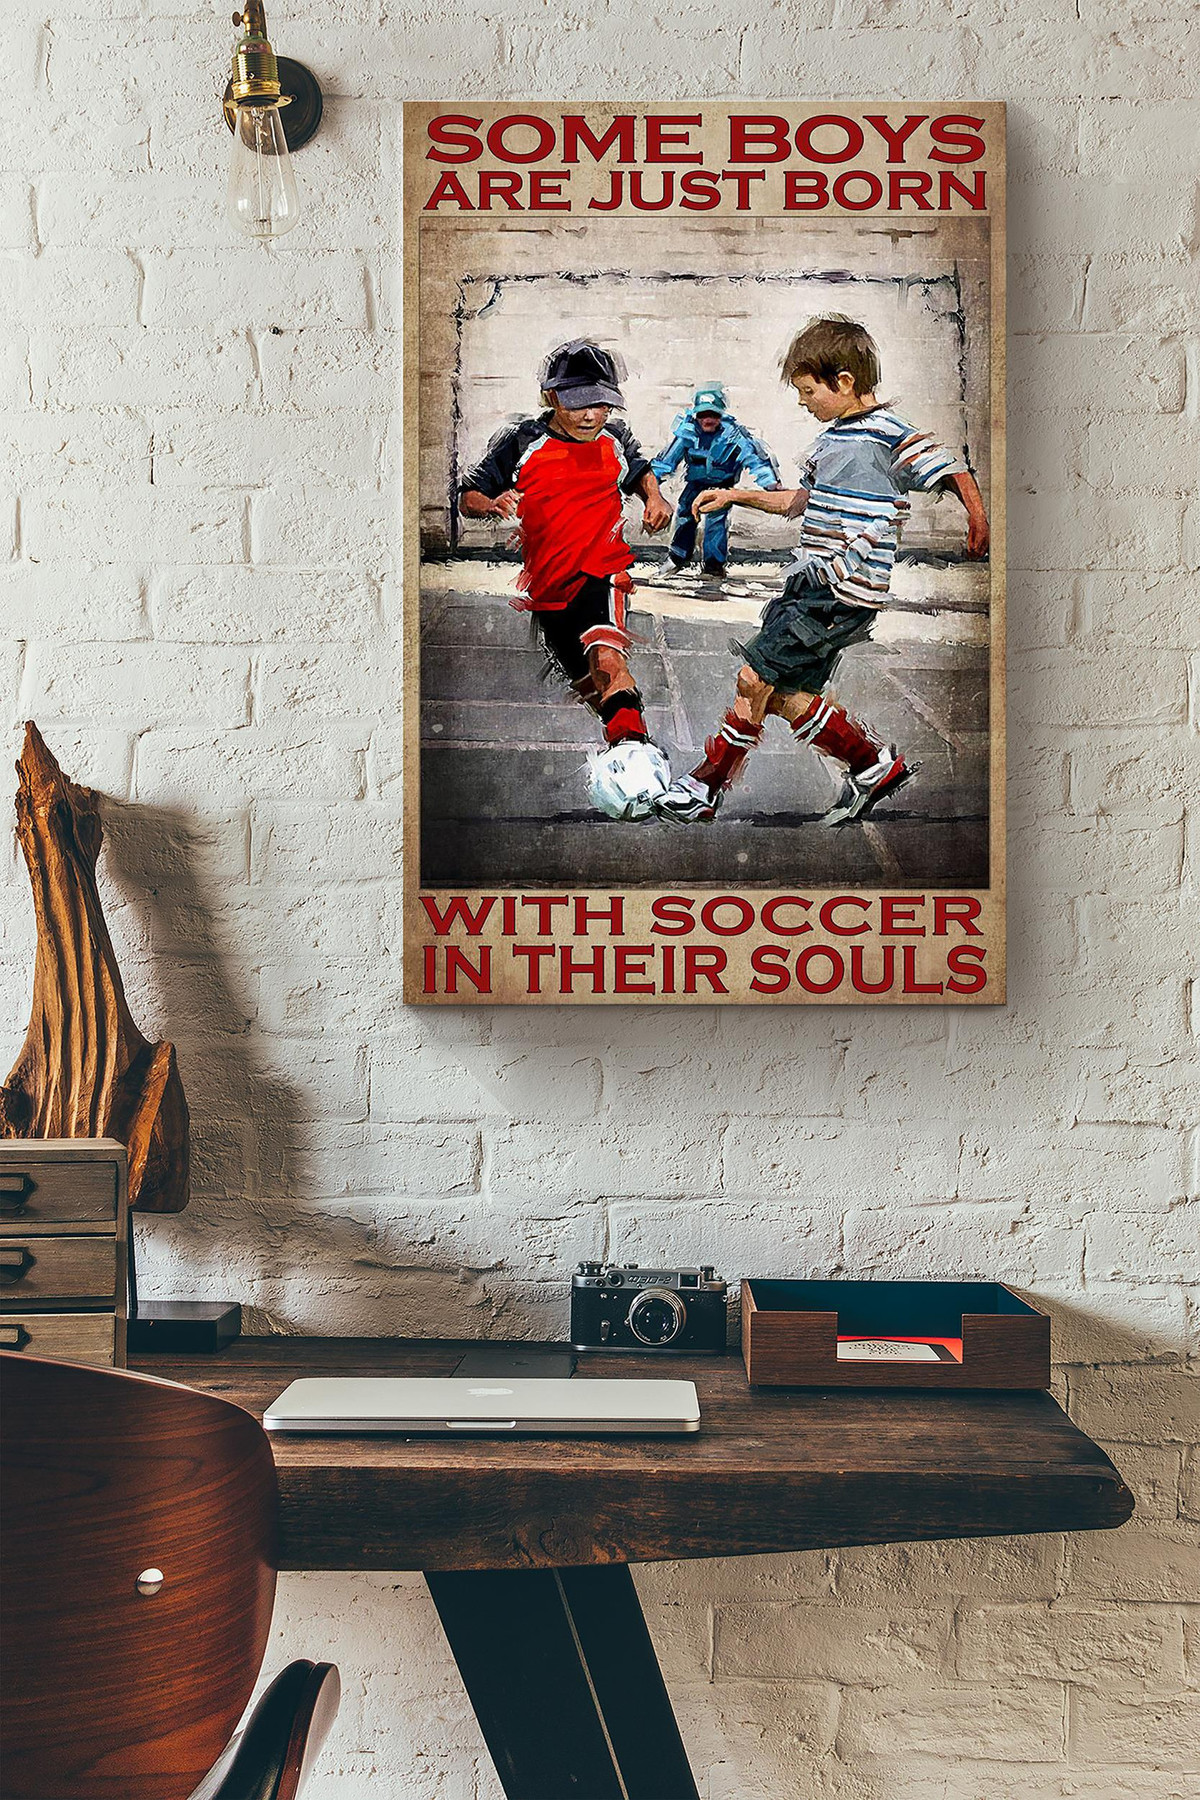 Some Boys Are Just Born With Soccer In Their Souls Canvas Painting Ideas, Canvas Hanging Prints, Gift Idea Framed Prints, Canvas Paintings Wrapped Canvas 8x10